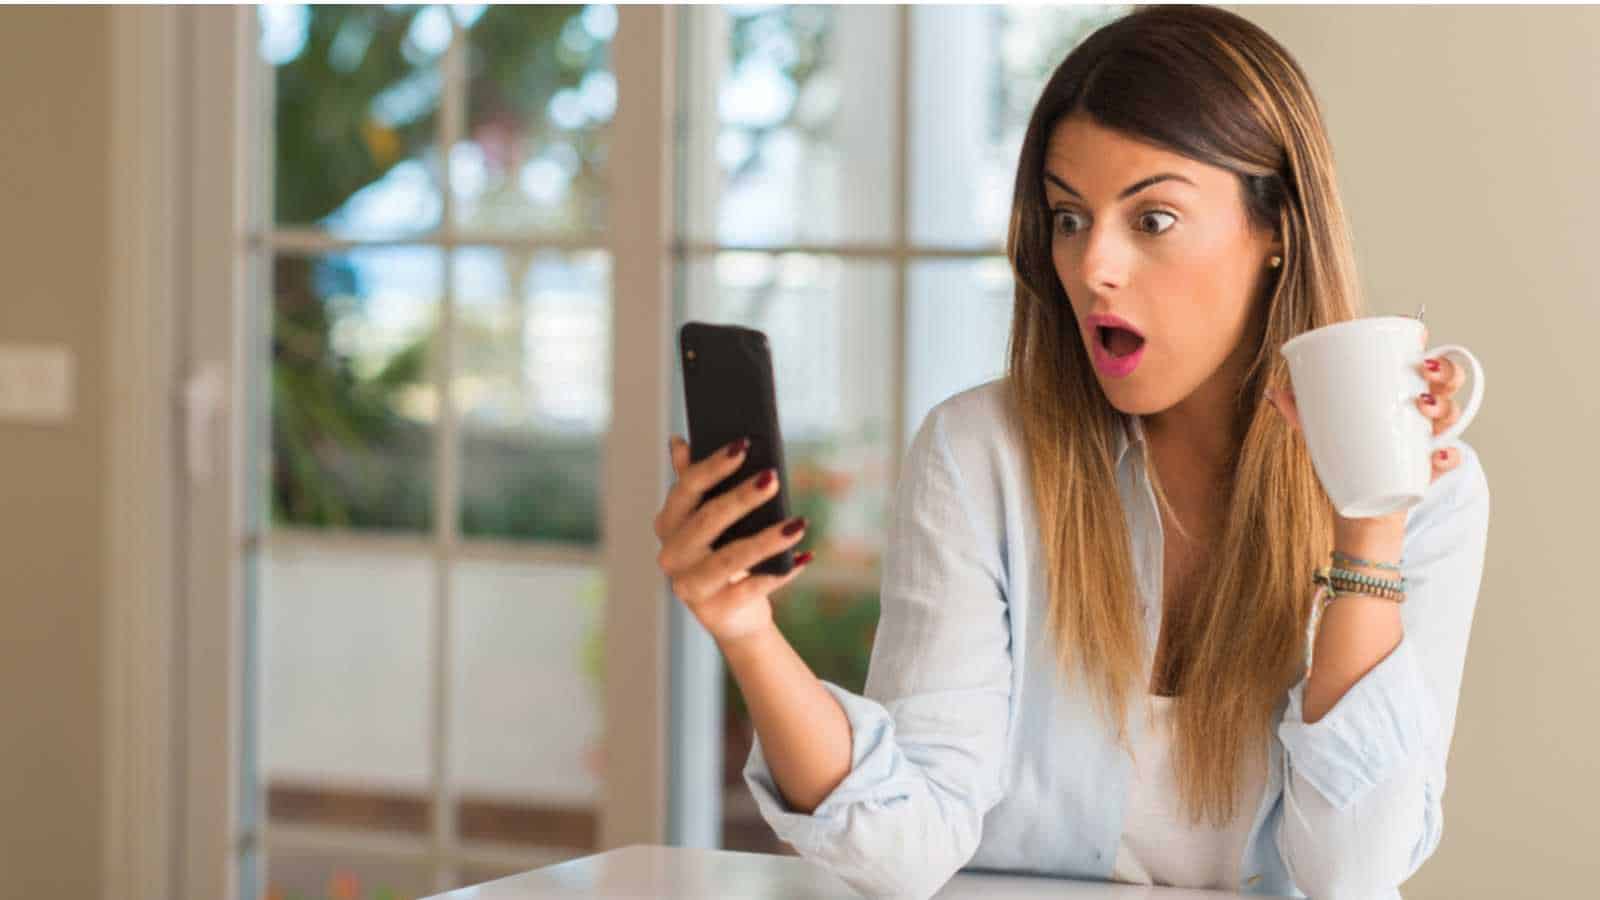 Woman on mobile excited